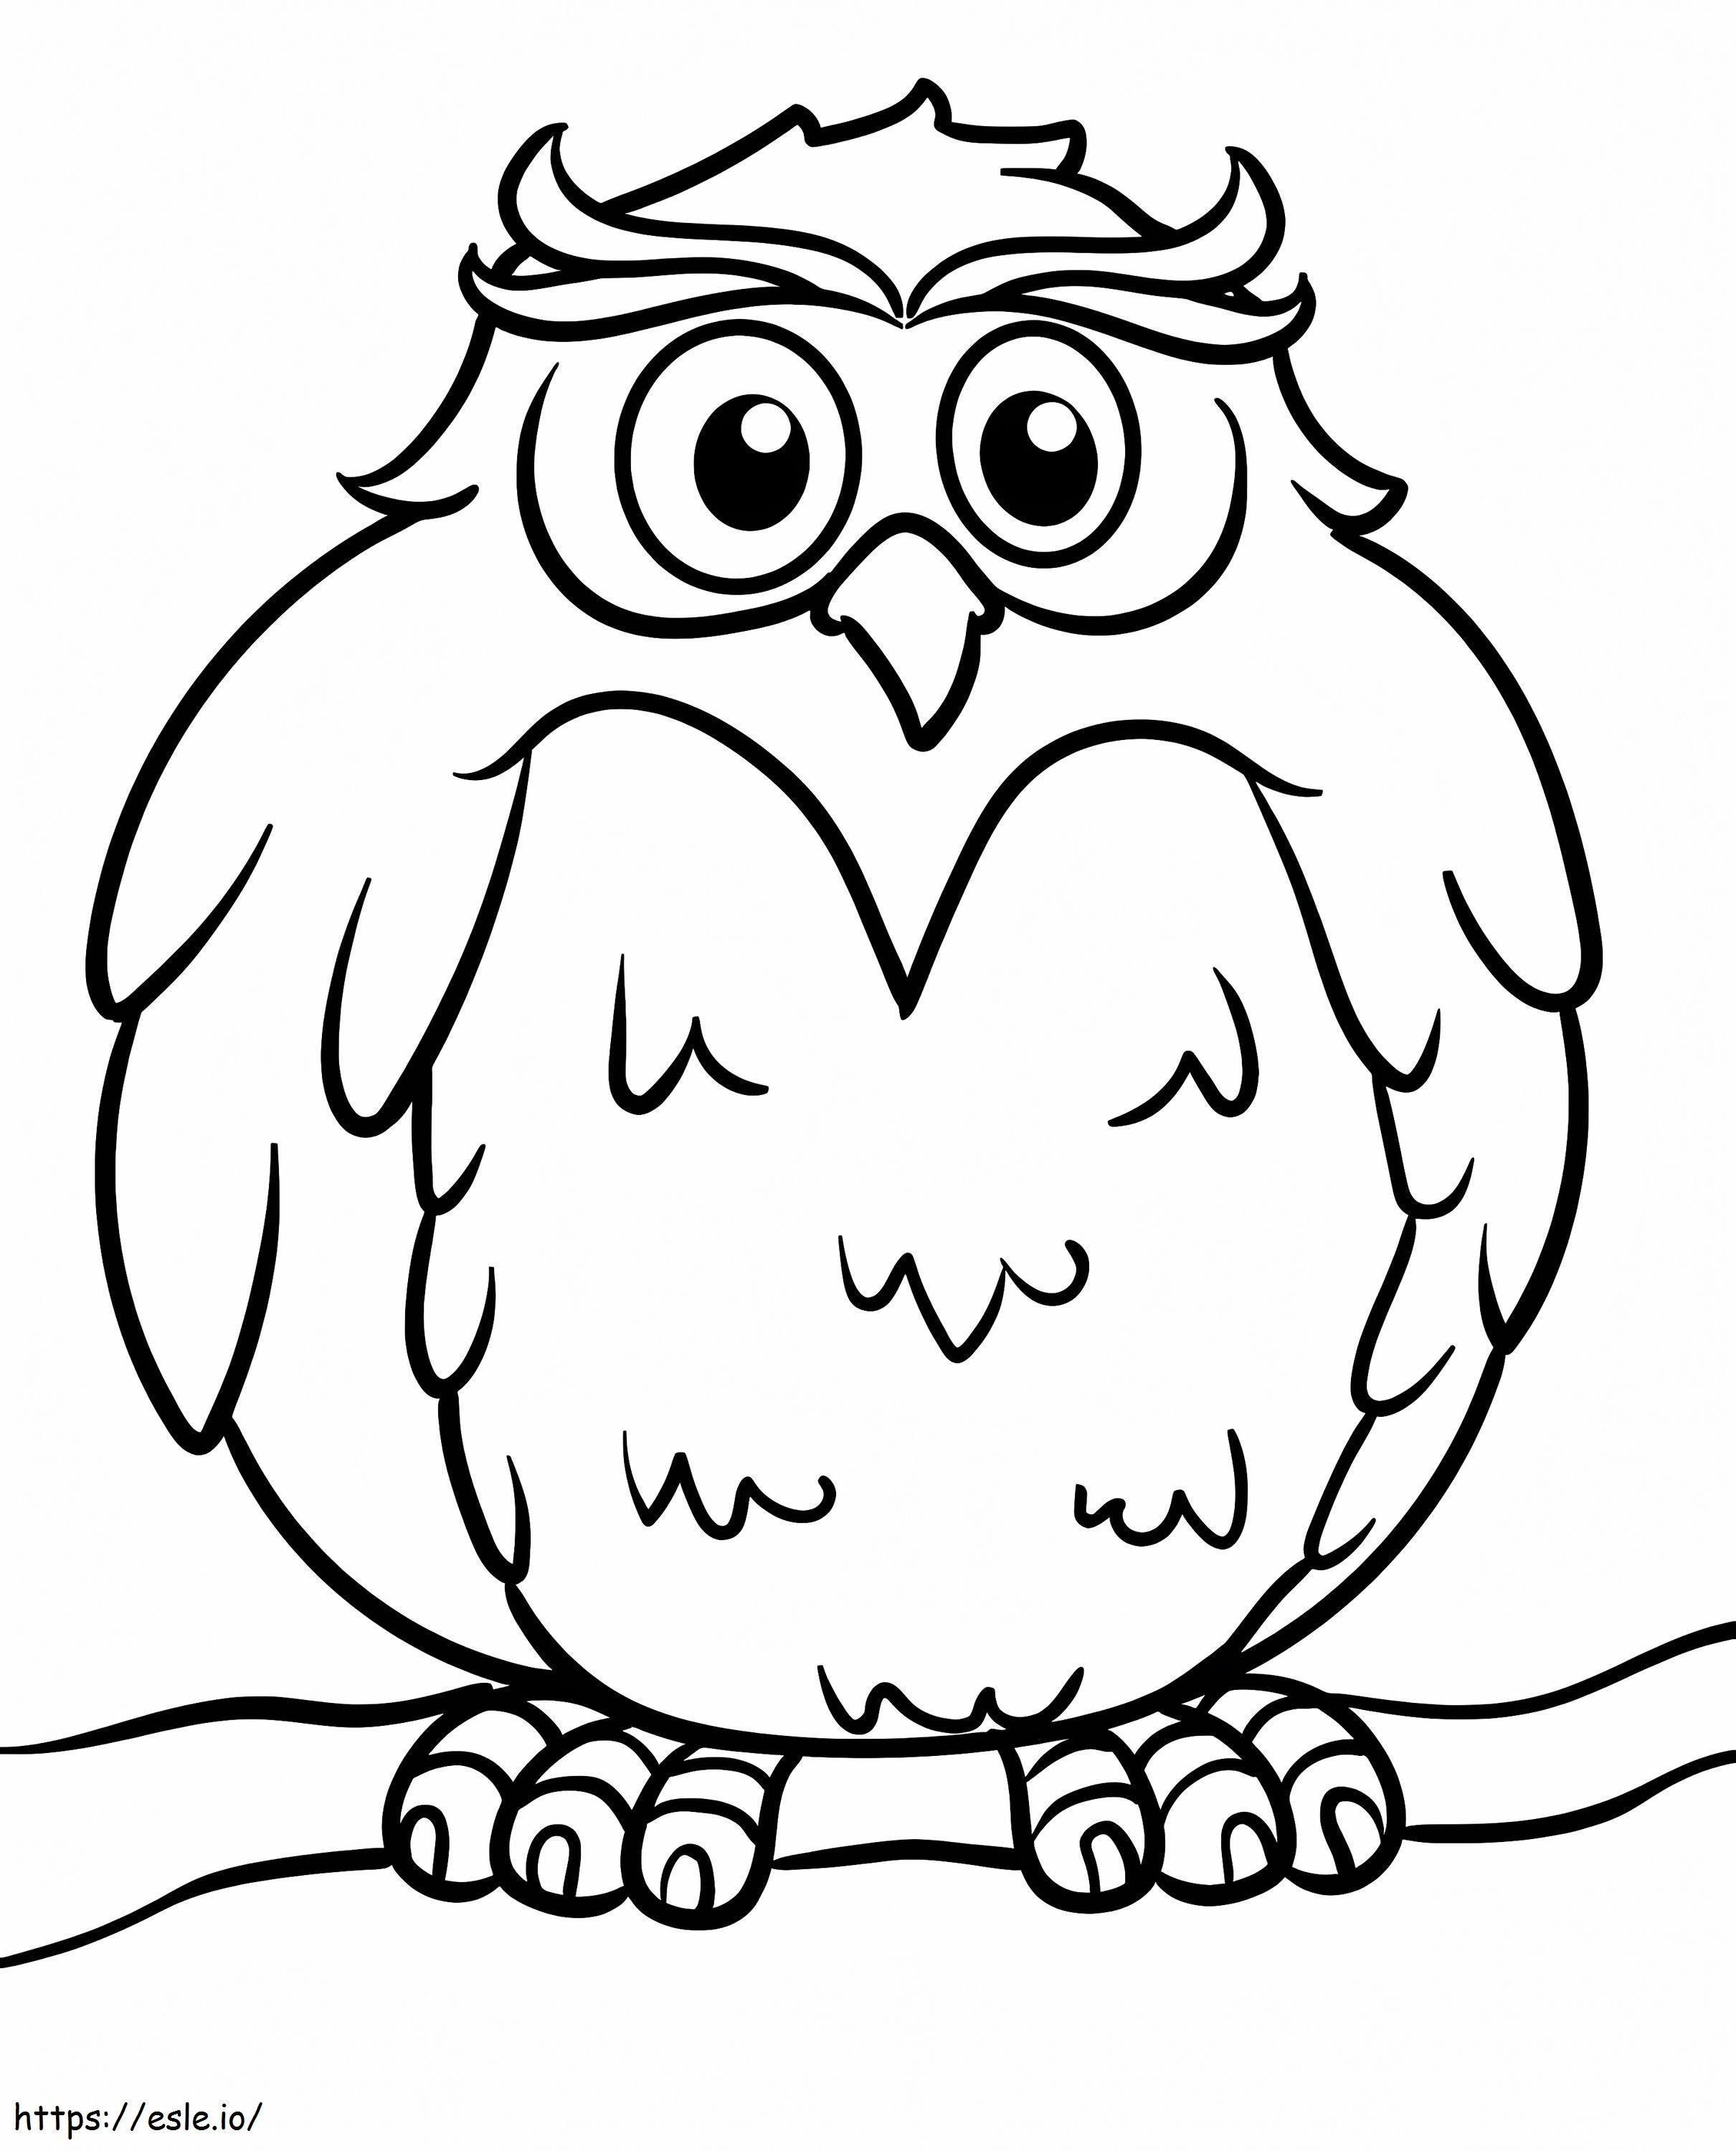 Fat Owl coloring page